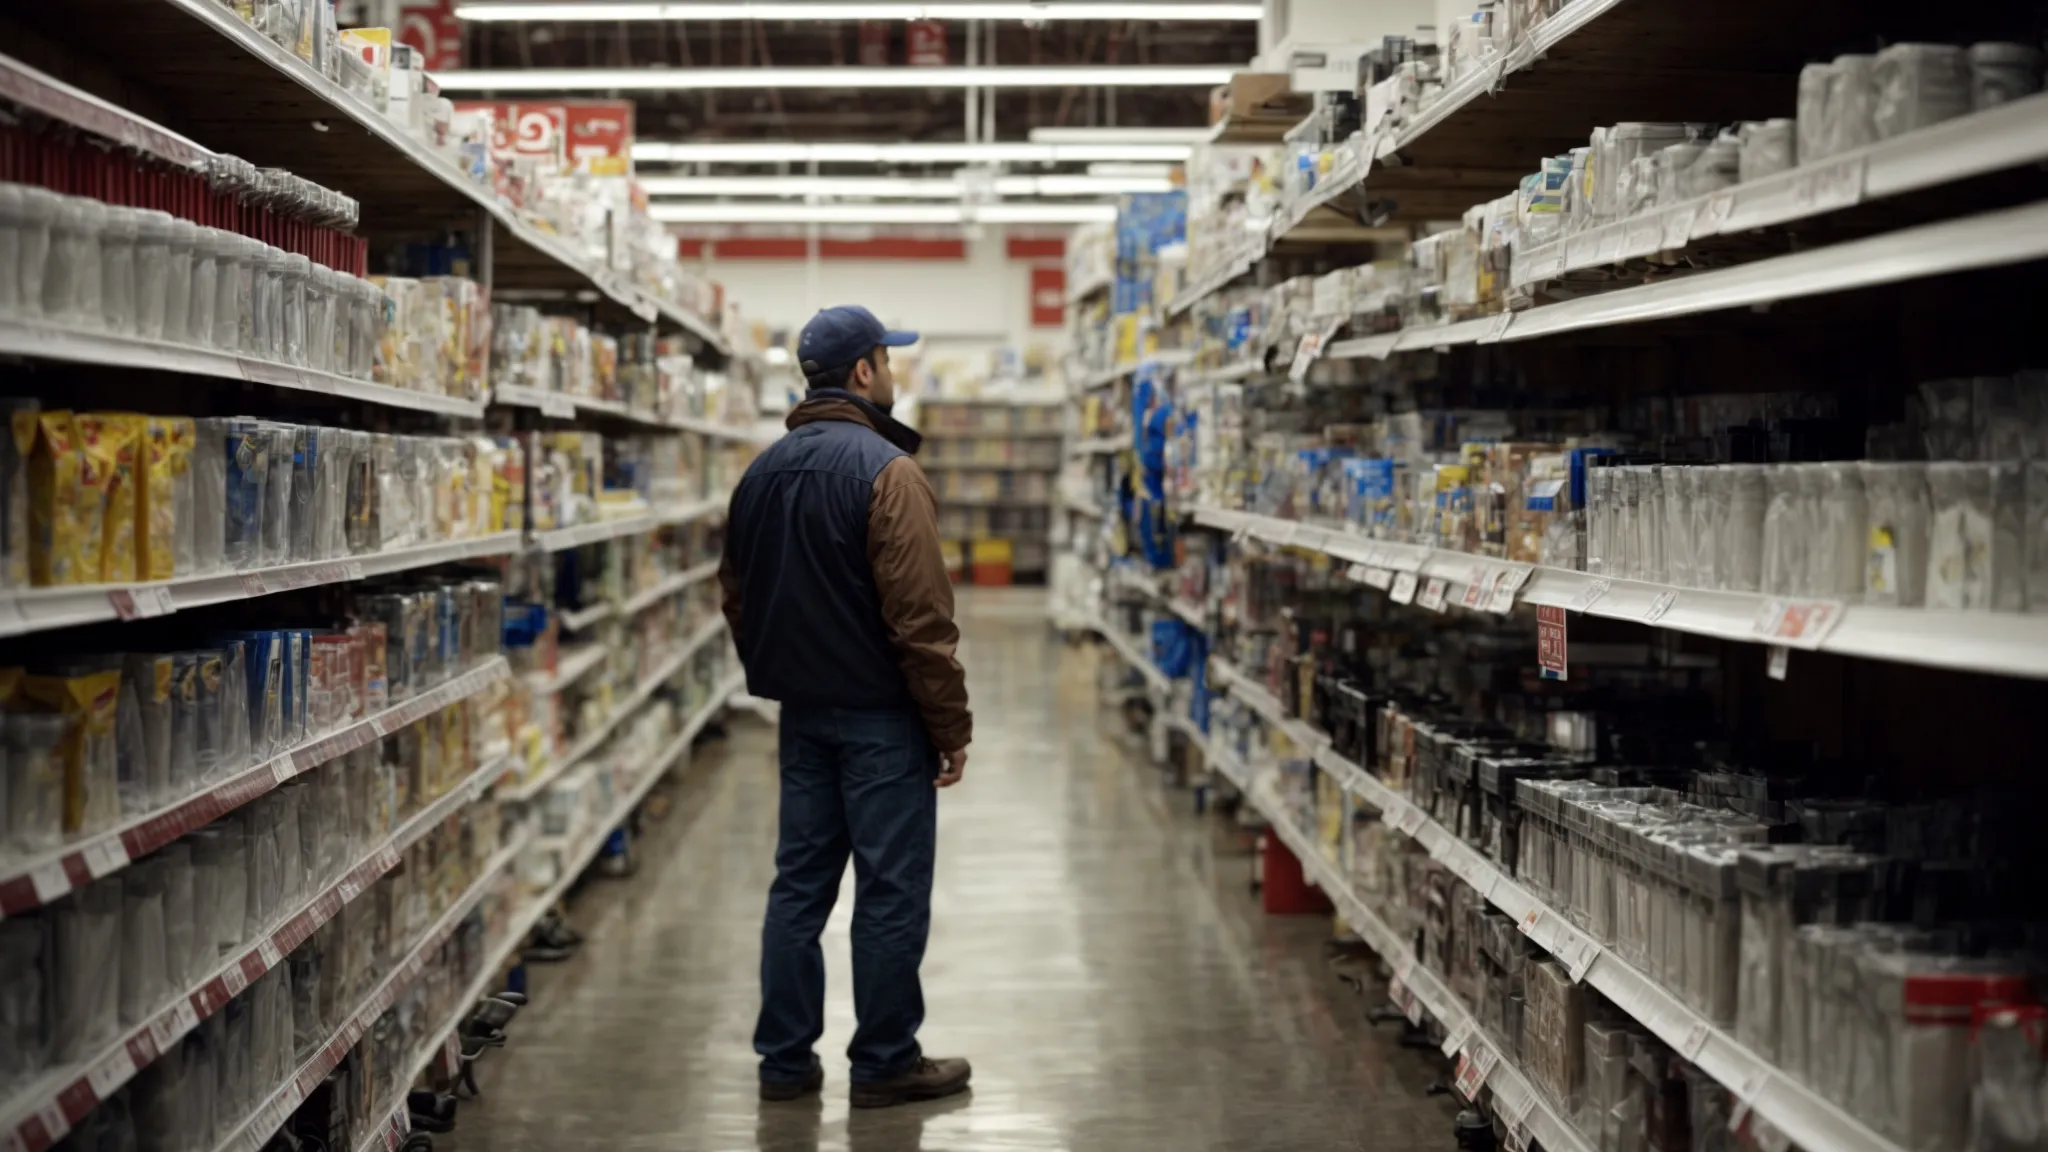 a homeowner stands thoughtfully in an aisle of a hardware store, gazing at shelves stocked with sump pump parts and plumbing tools, while a professional plumber consults with another client in the background.